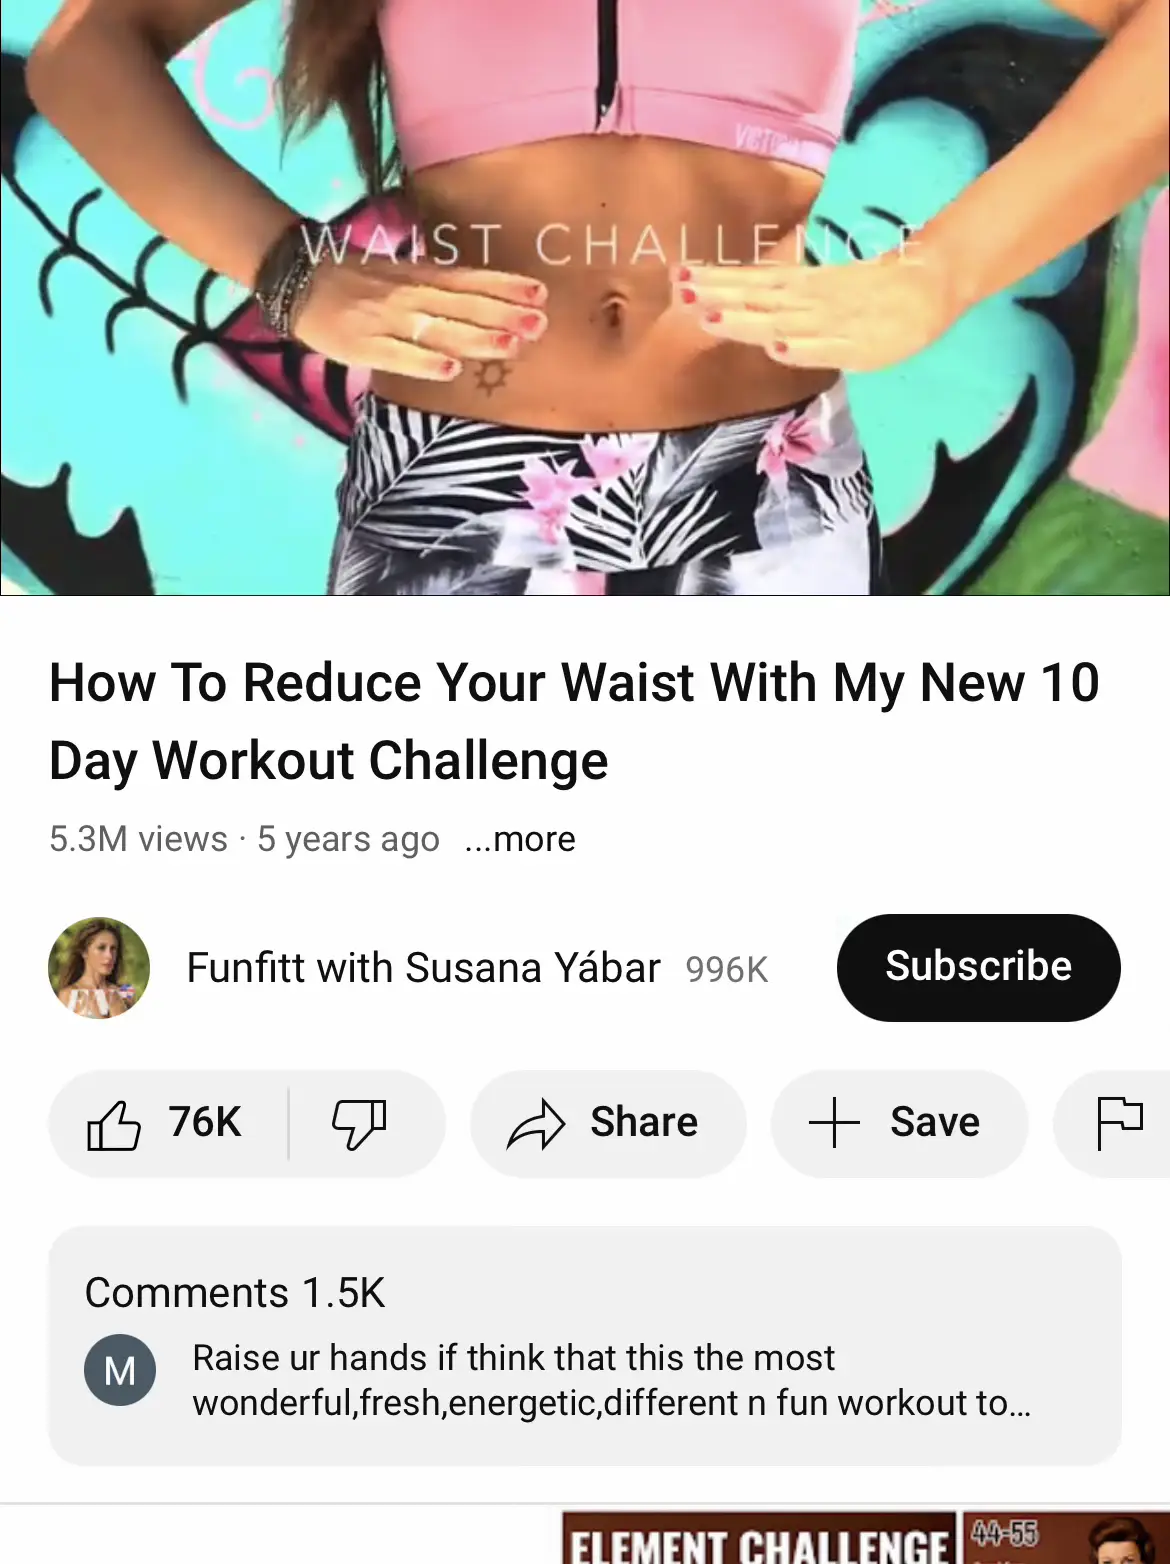 HOW TO WASH YOUR WAIST TRAINER 🧼 You wouldn't re-wear your sweaty clothes.  So don't re-wear your sweaty waist trainer too! Here a